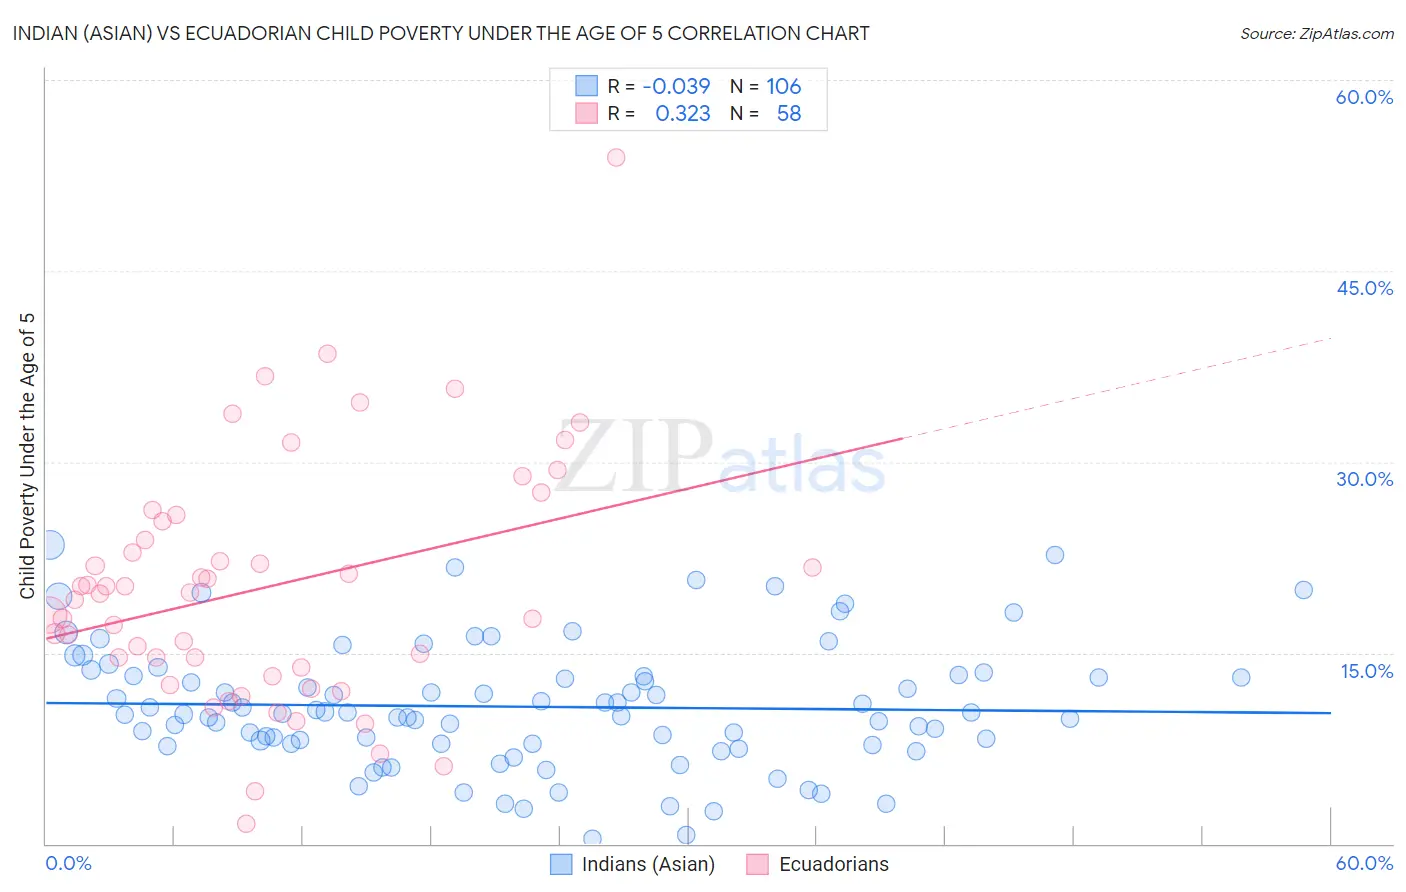 Indian (Asian) vs Ecuadorian Child Poverty Under the Age of 5